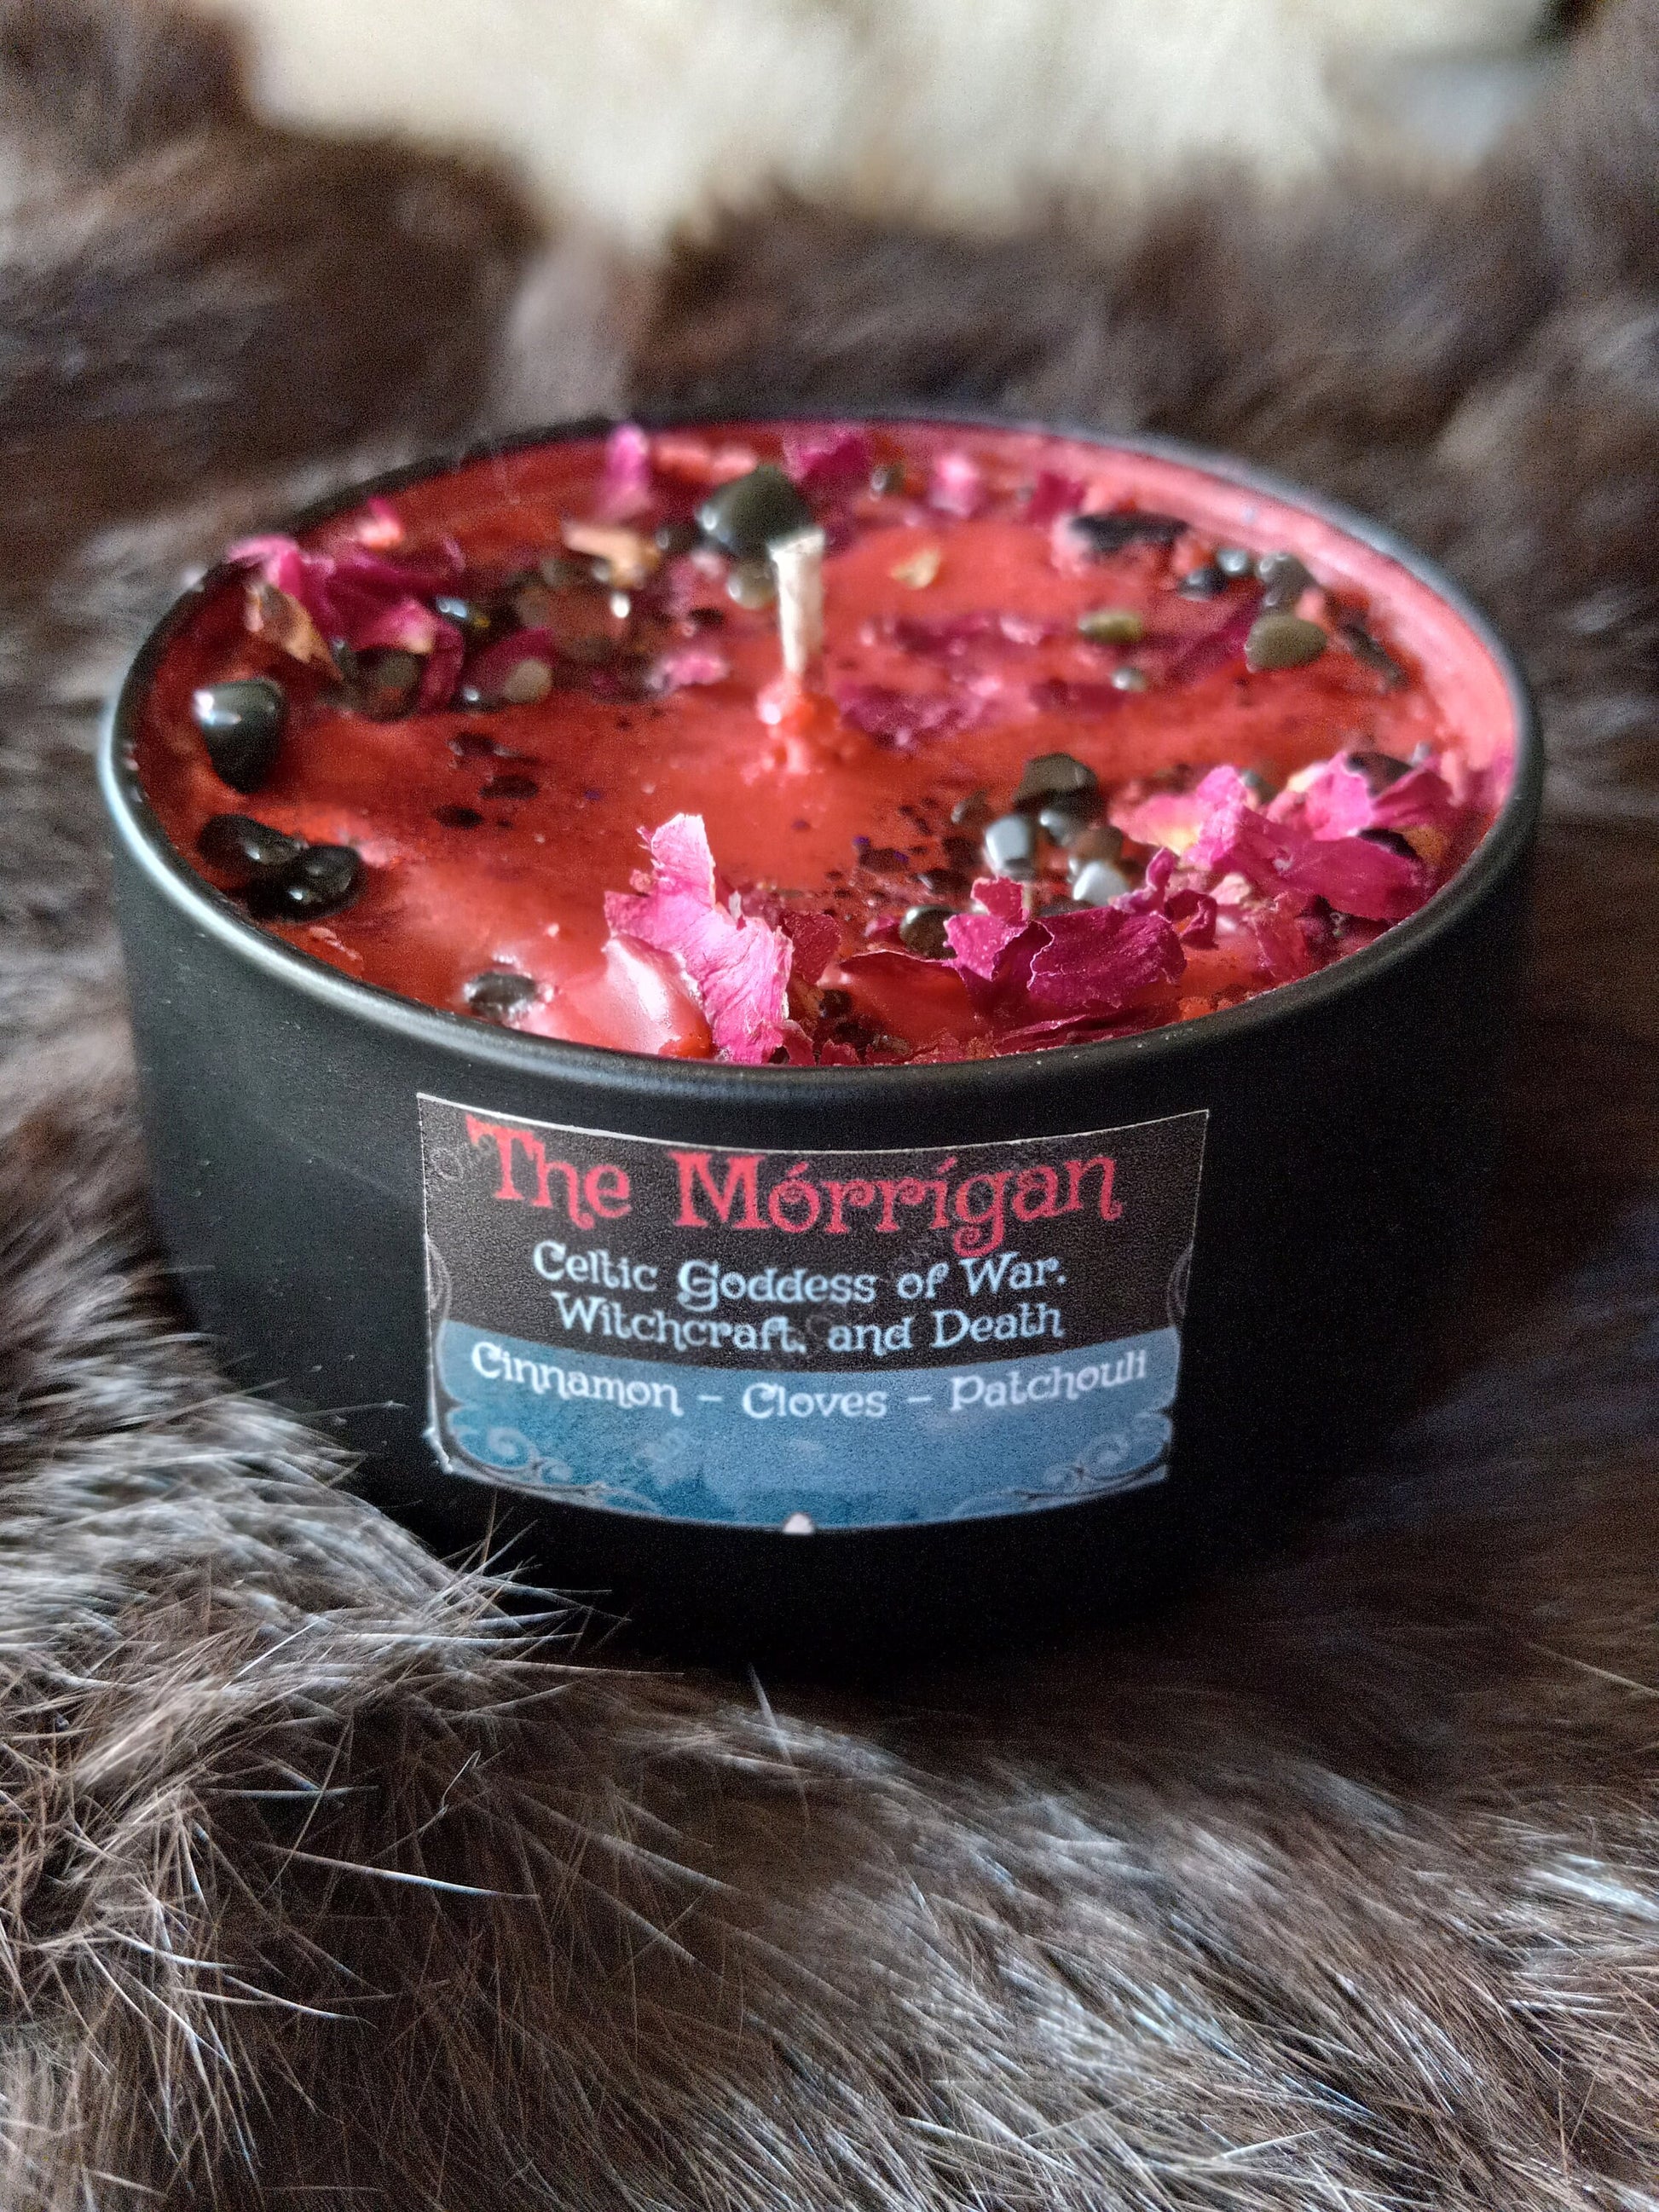 Ozark Moons 8 oz Soy Candles – Your Scent Choice and Color/ Hand Poured with crystals and botanicals - Deity Fragrances Mythology Gift